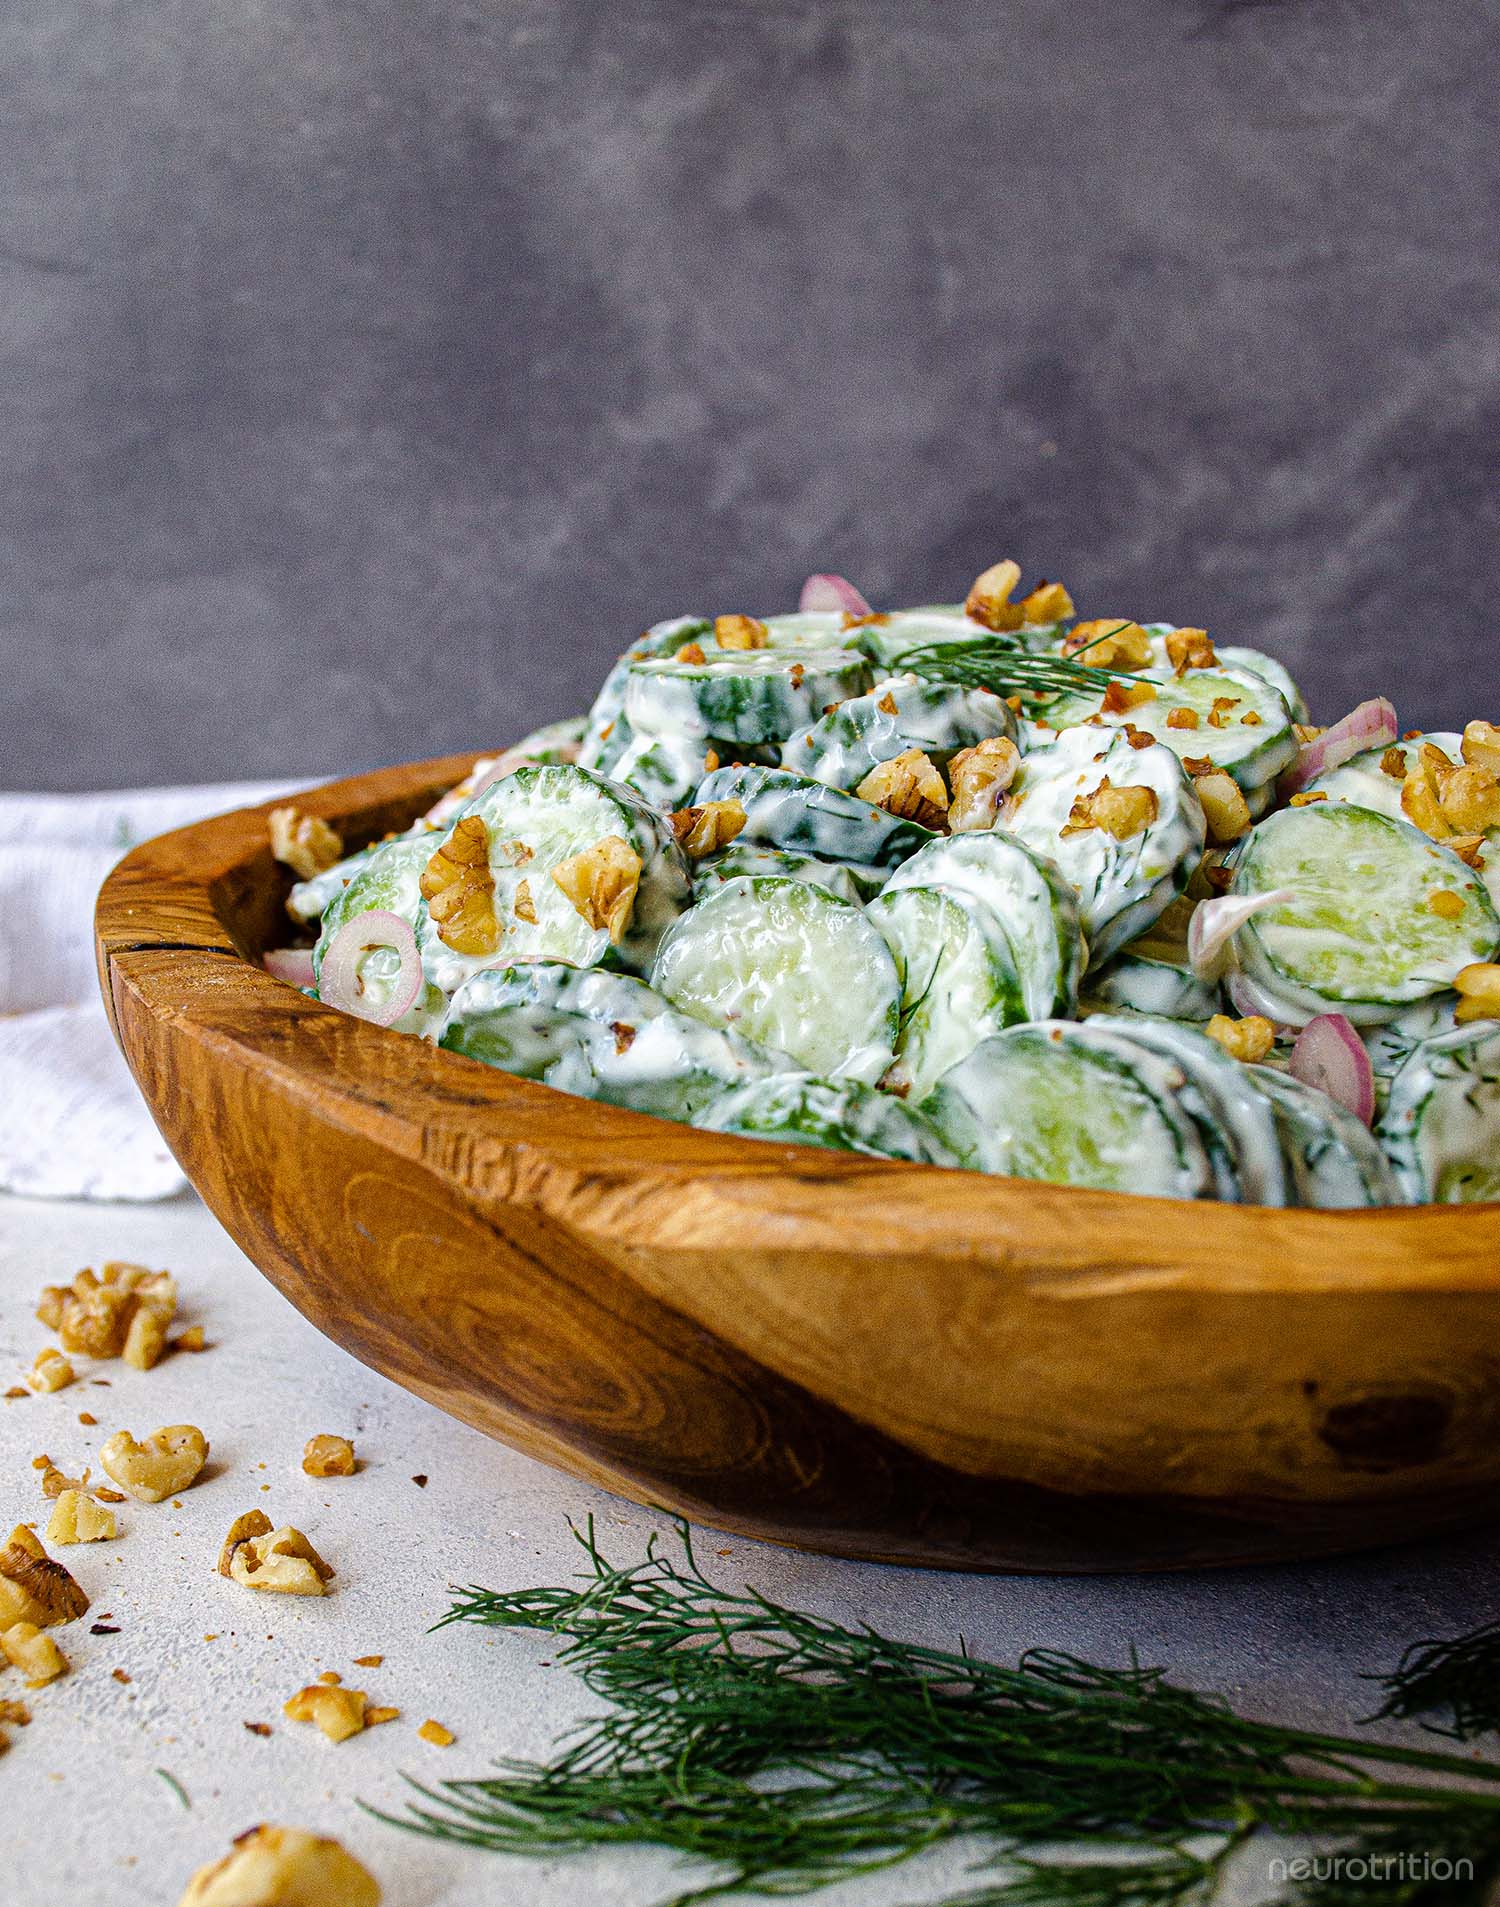 Sliced cucumbers and chopped walnuts in a creamy dressing inside a wooden bowl, topped with dill springs.